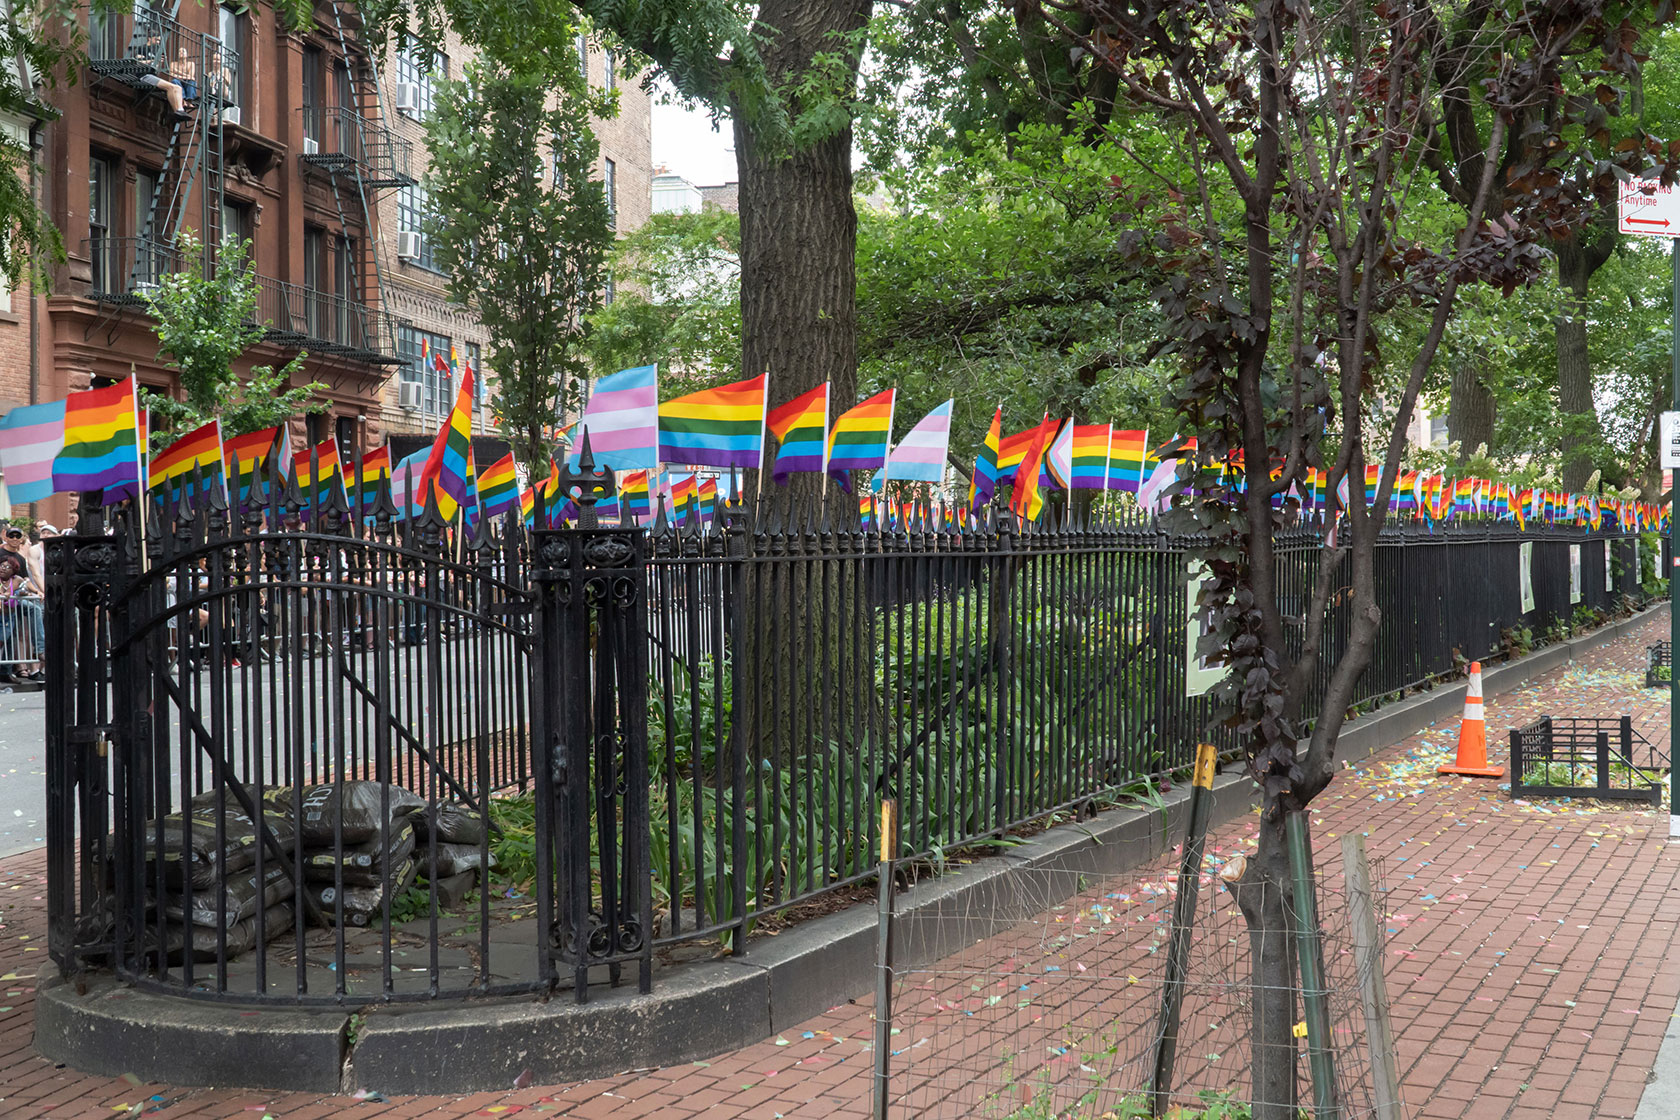 Photo shows a black wrought iron fence next to a brick sidewalk. Small, colorful pride and transgender flags line the fence.